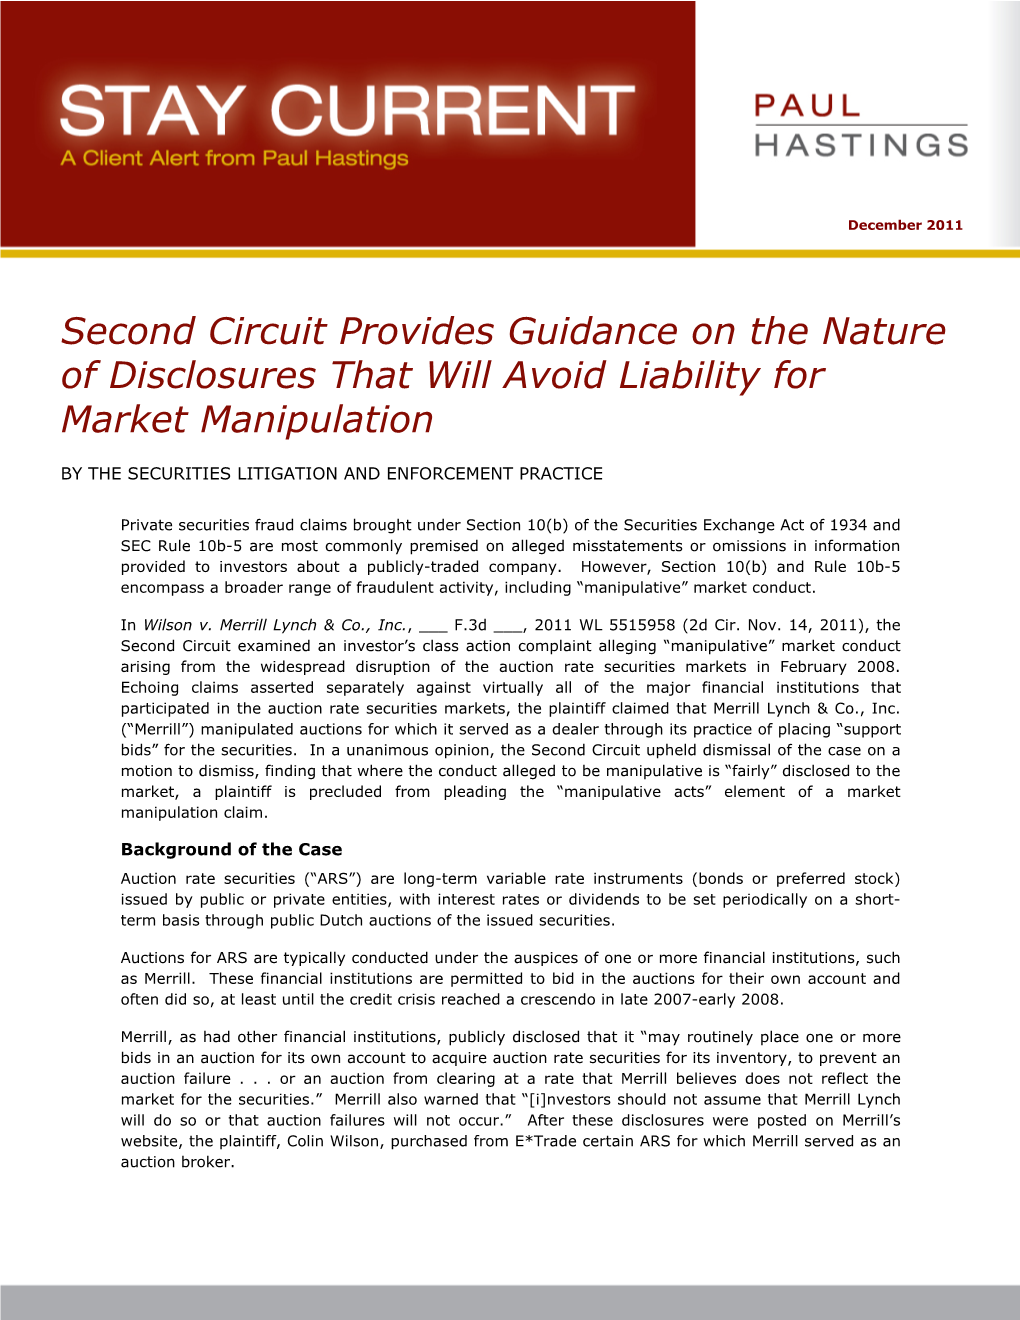 Second Circuit Provides Guidance on the Nature of Disclosures That Will Avoid Liability for Market Manipulation